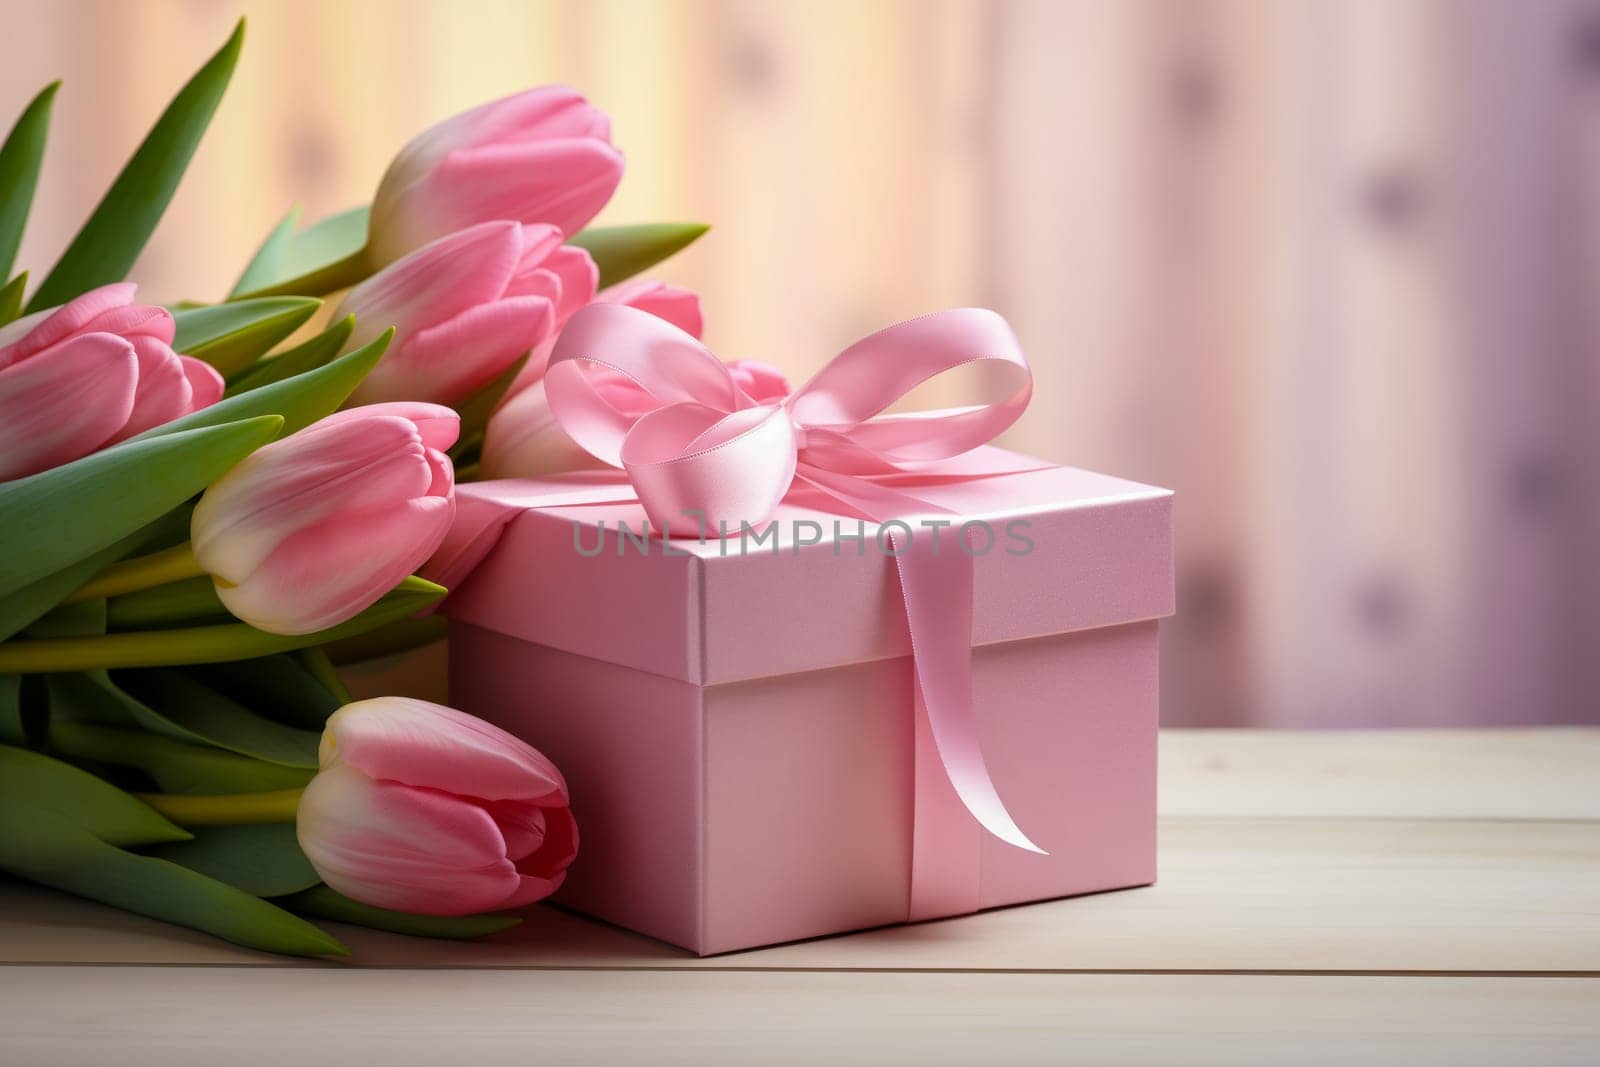 Gift Box with Pink Ribbon Beside Fresh Tulips by dimol